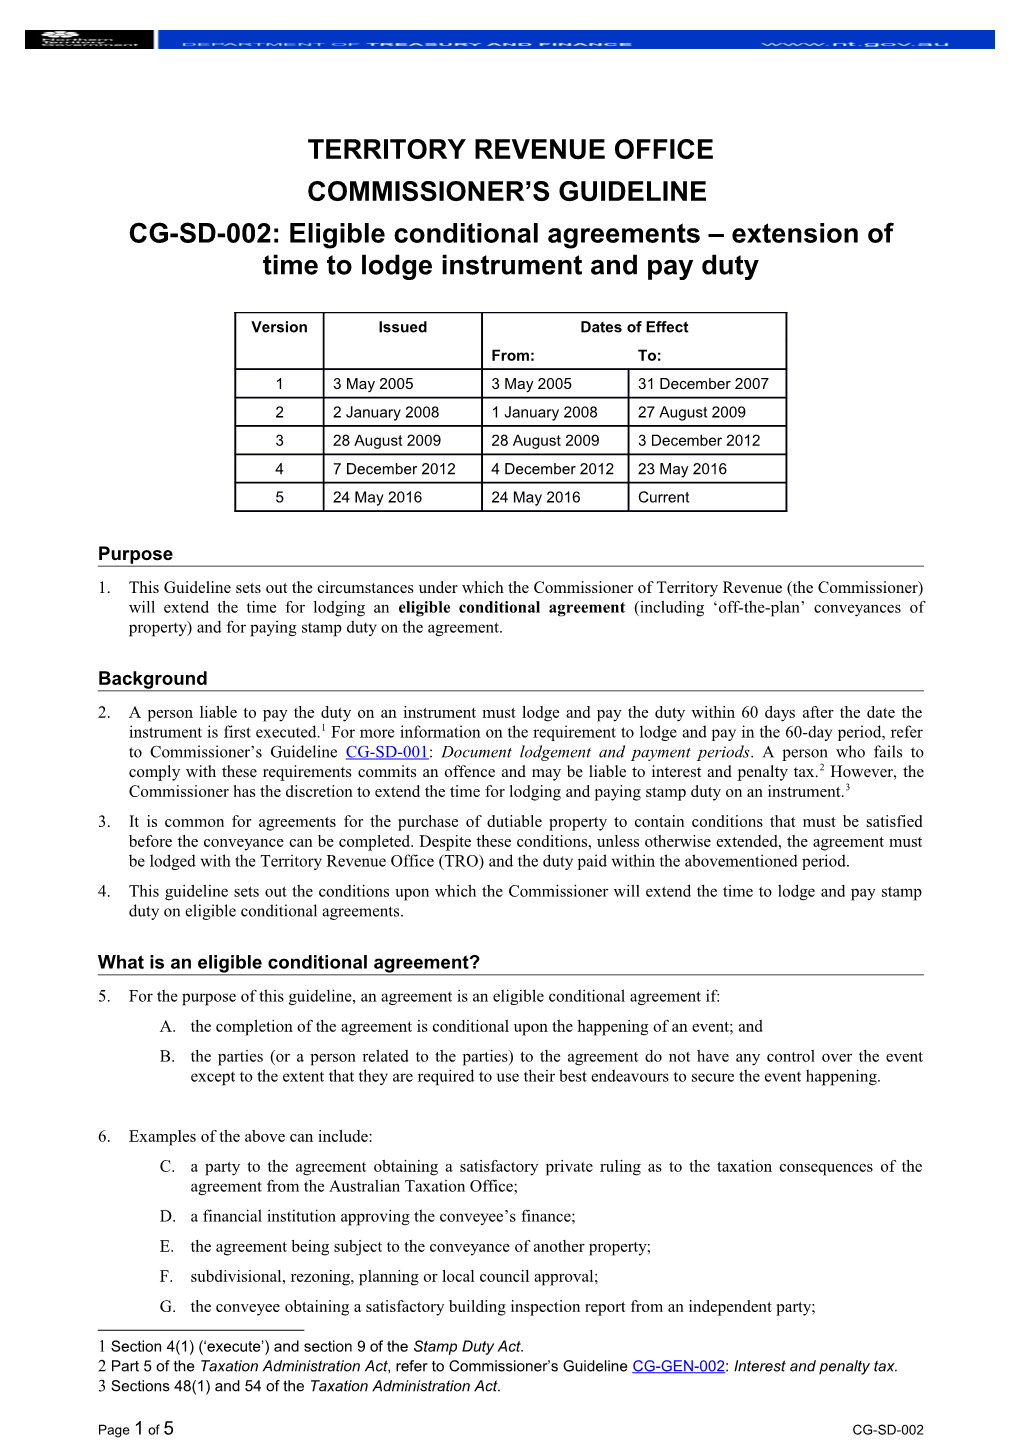 Eligible Conditional Agreements Extension of Time to Lodge Instrument and Pay Duty